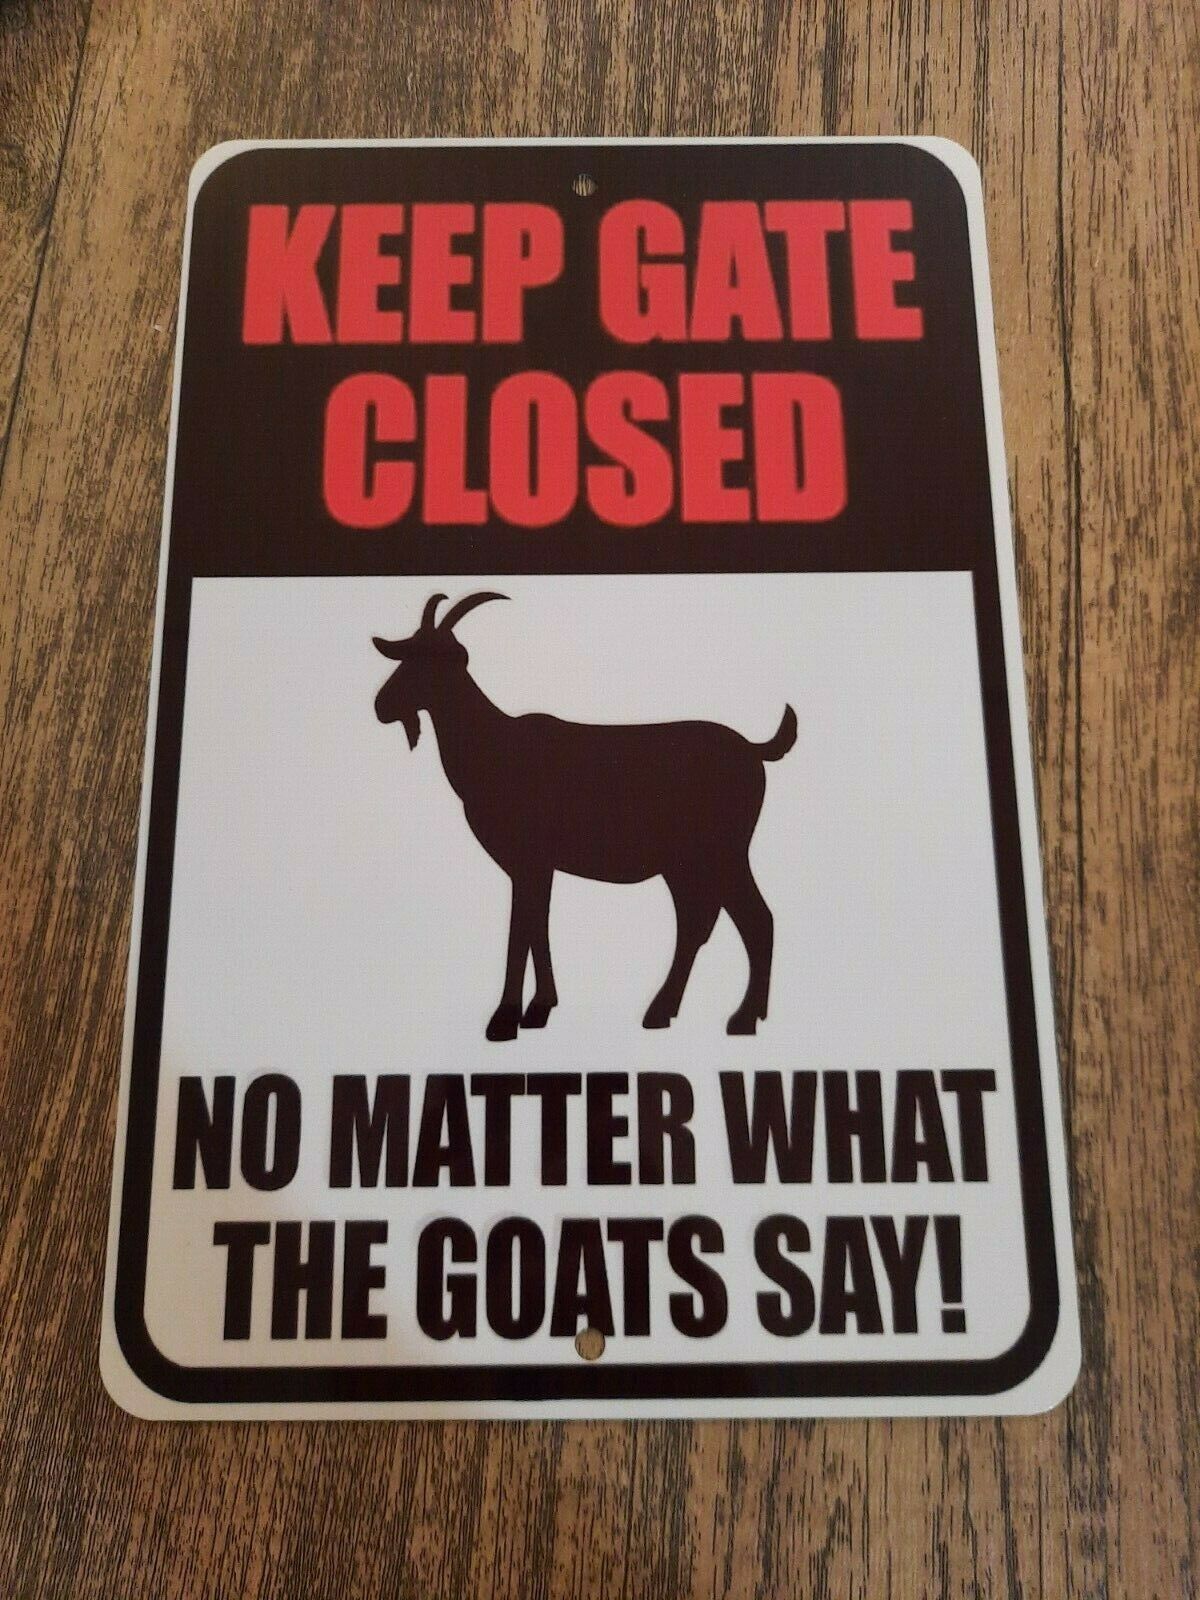 Keep Gate Closed No Matter What The Goats Say 8x12 Metal Wall Sign Animals Misc Poster